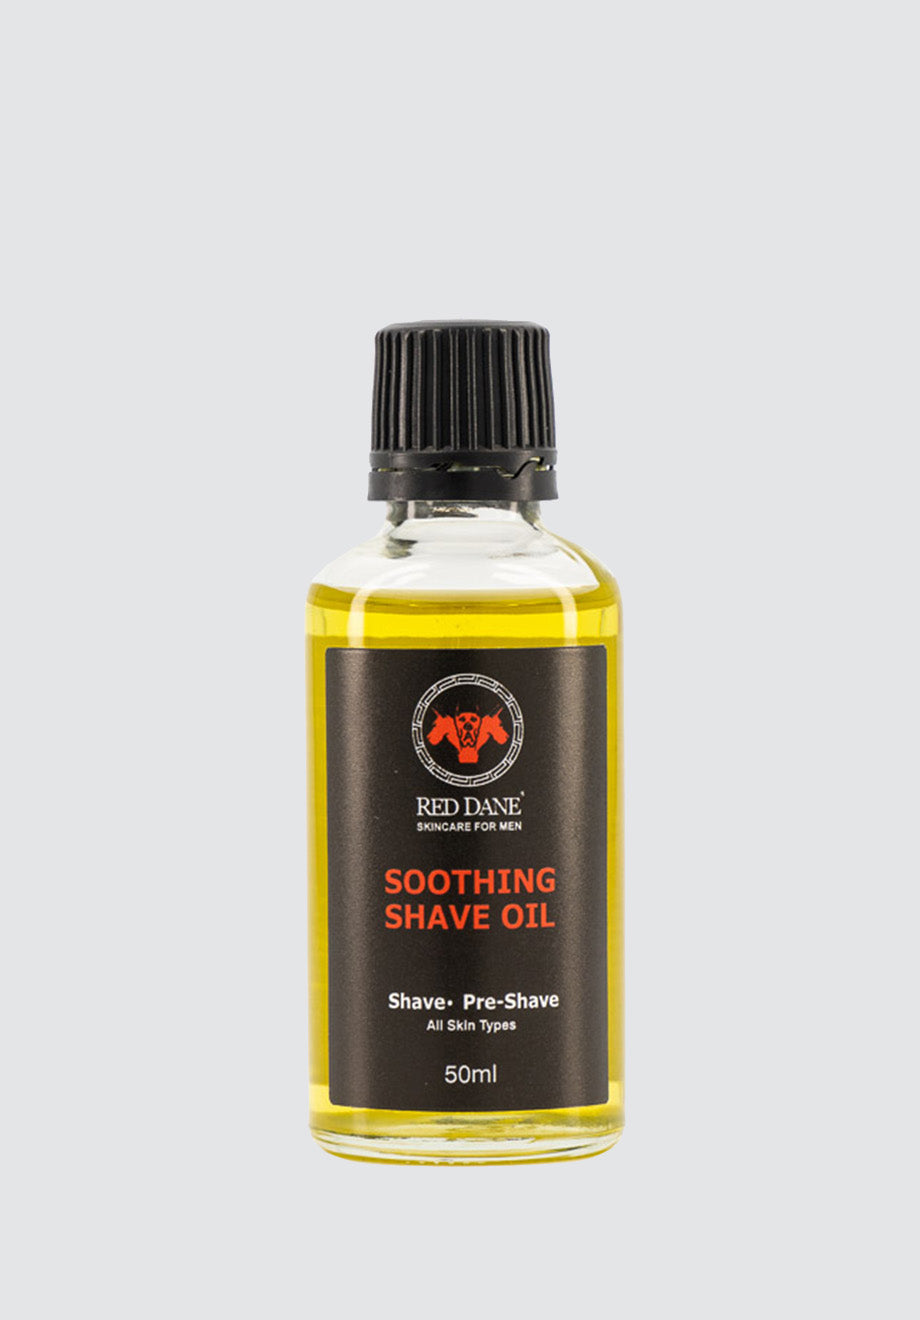 Soothing Shave Oil